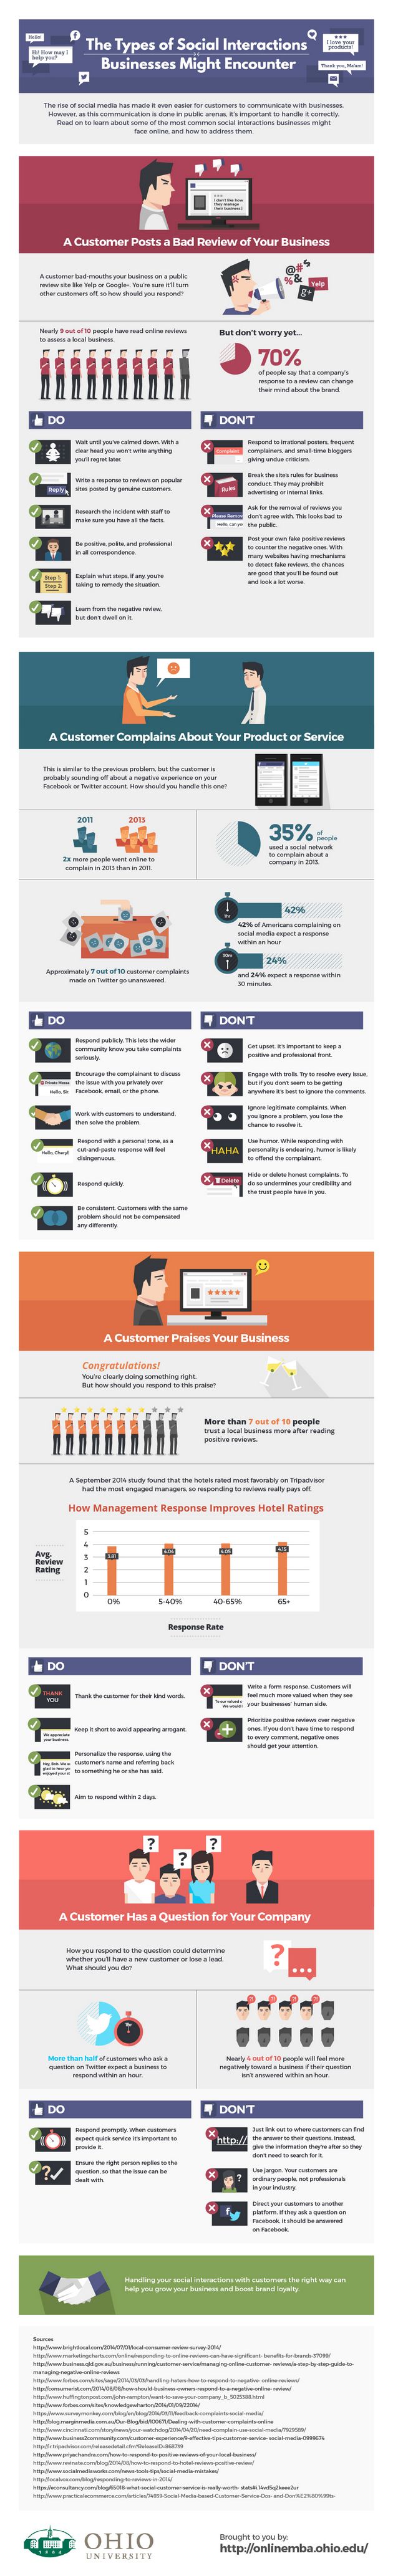 Types of Social Interaction a Business is Likely to Encounter (Infographic)